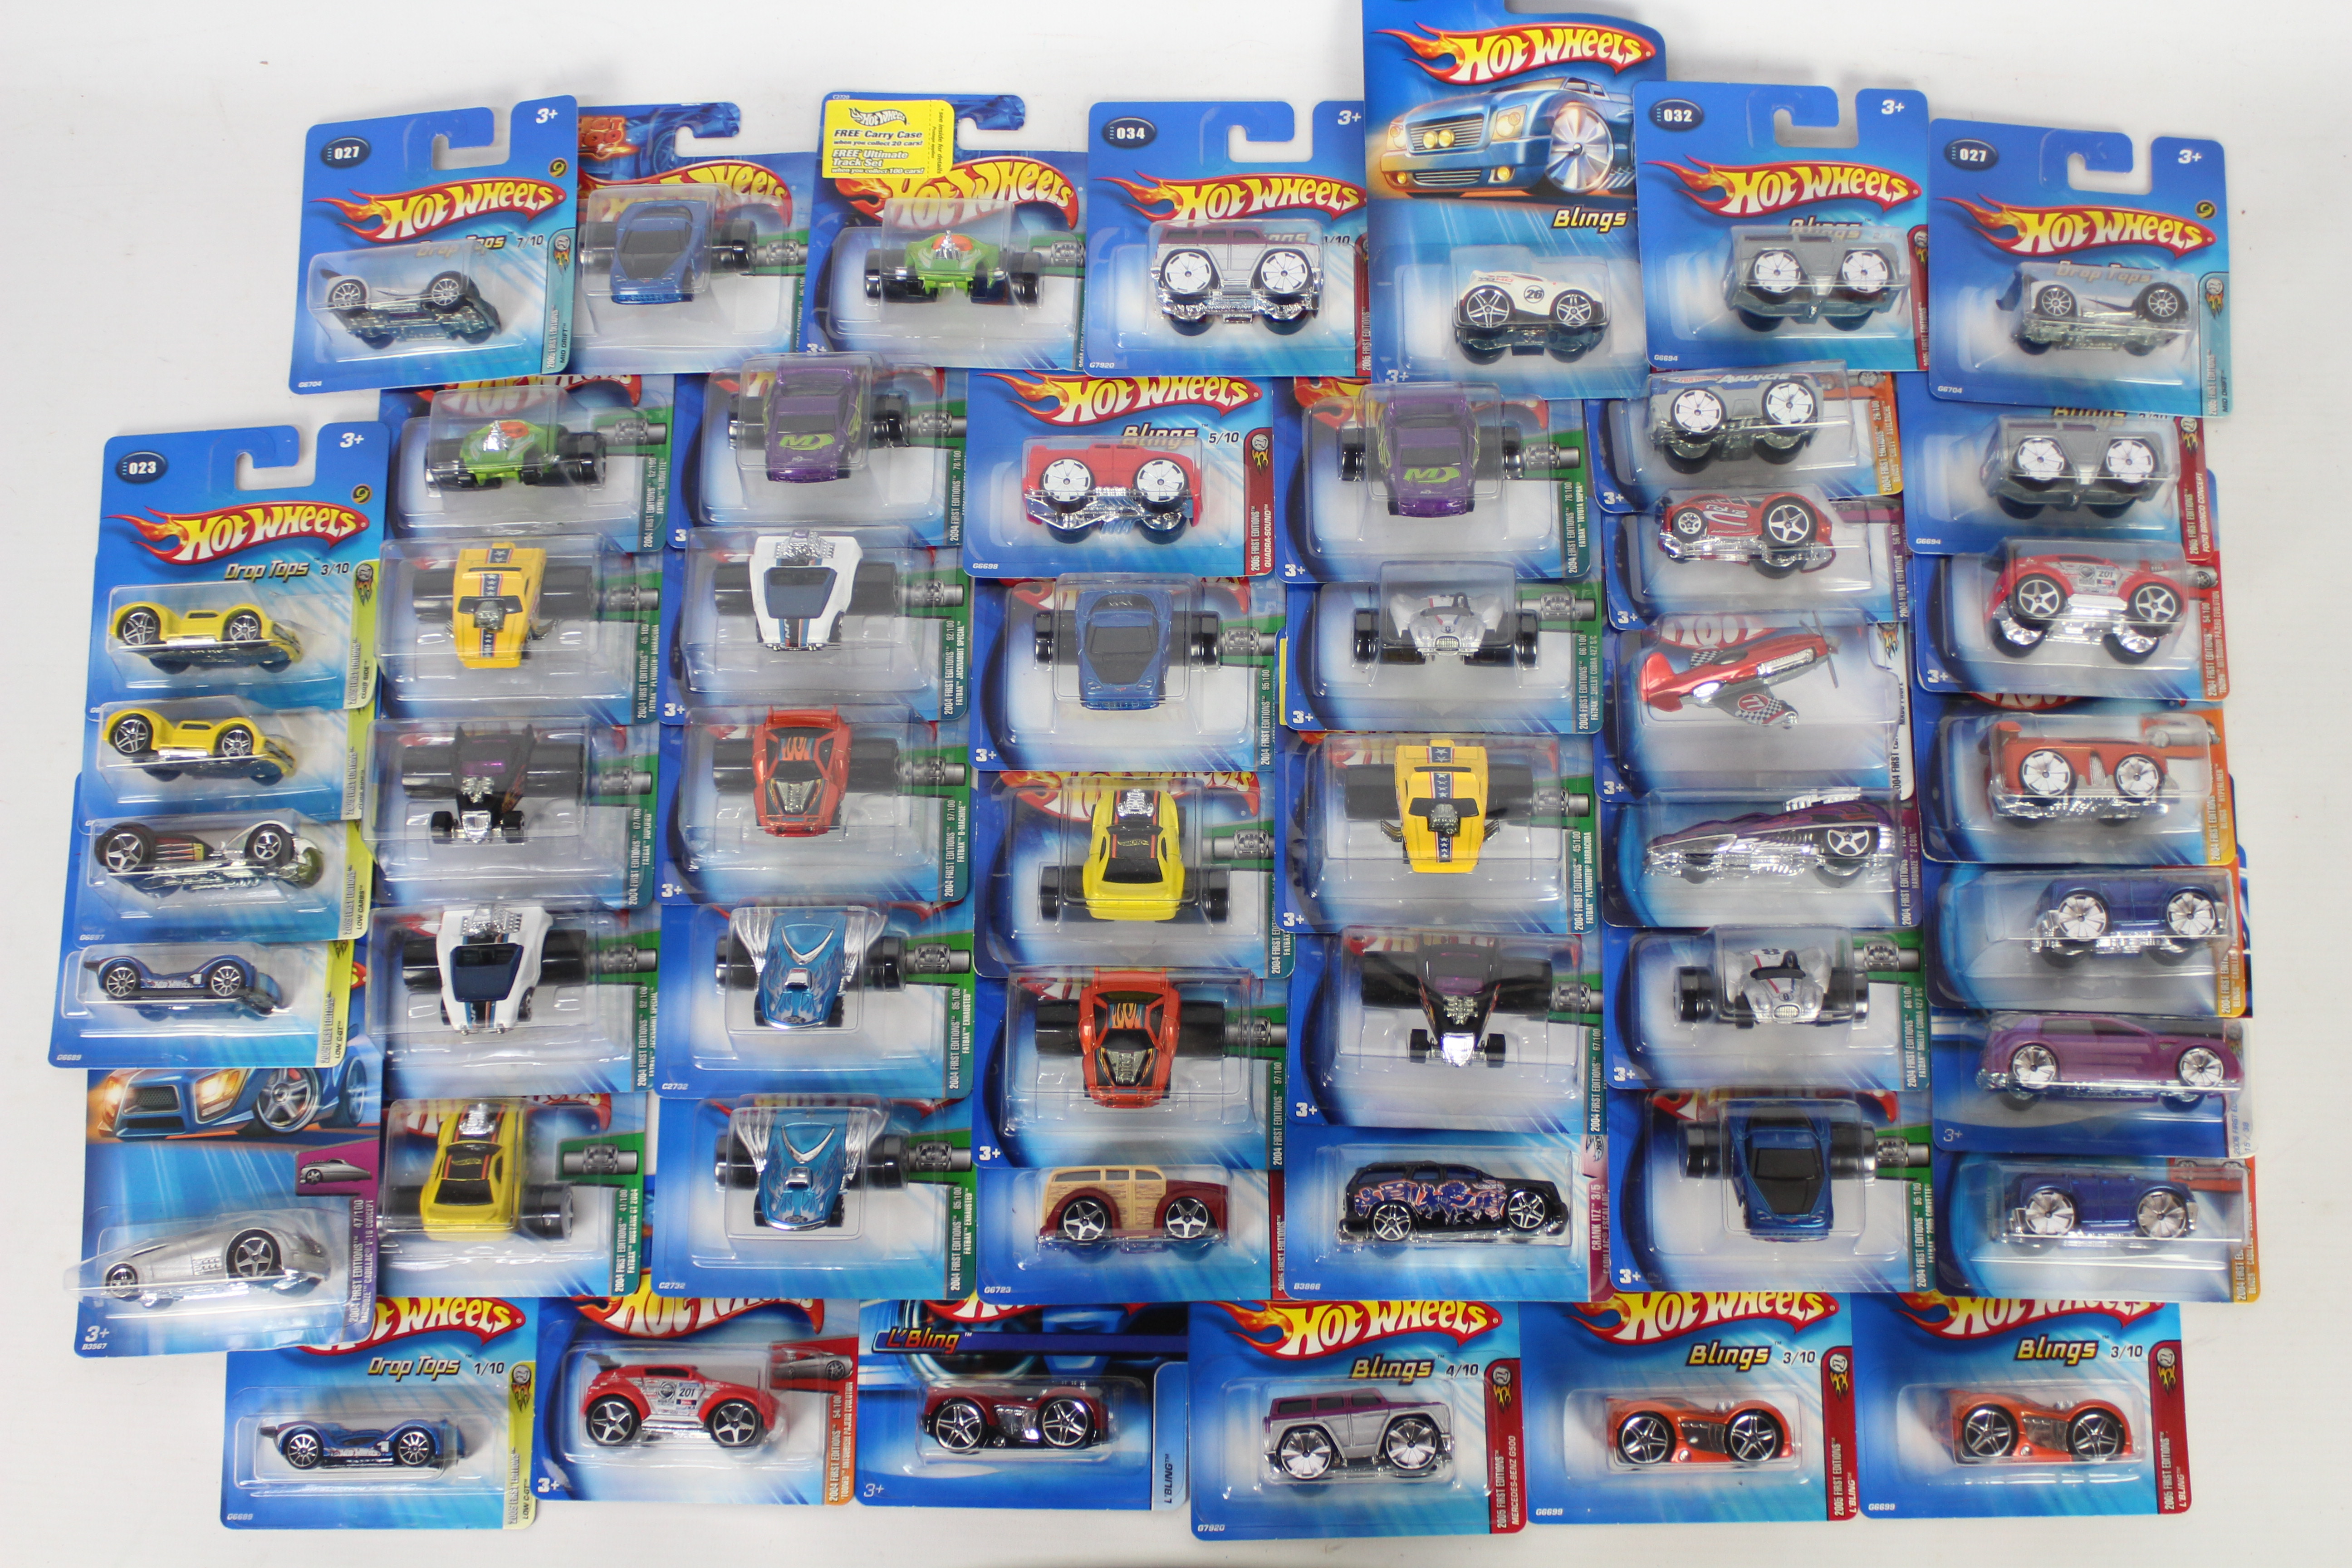 Hot Wheels - 50 x Unopened carded models from the early 2000s including Fatbak Plymouth Barracuda #